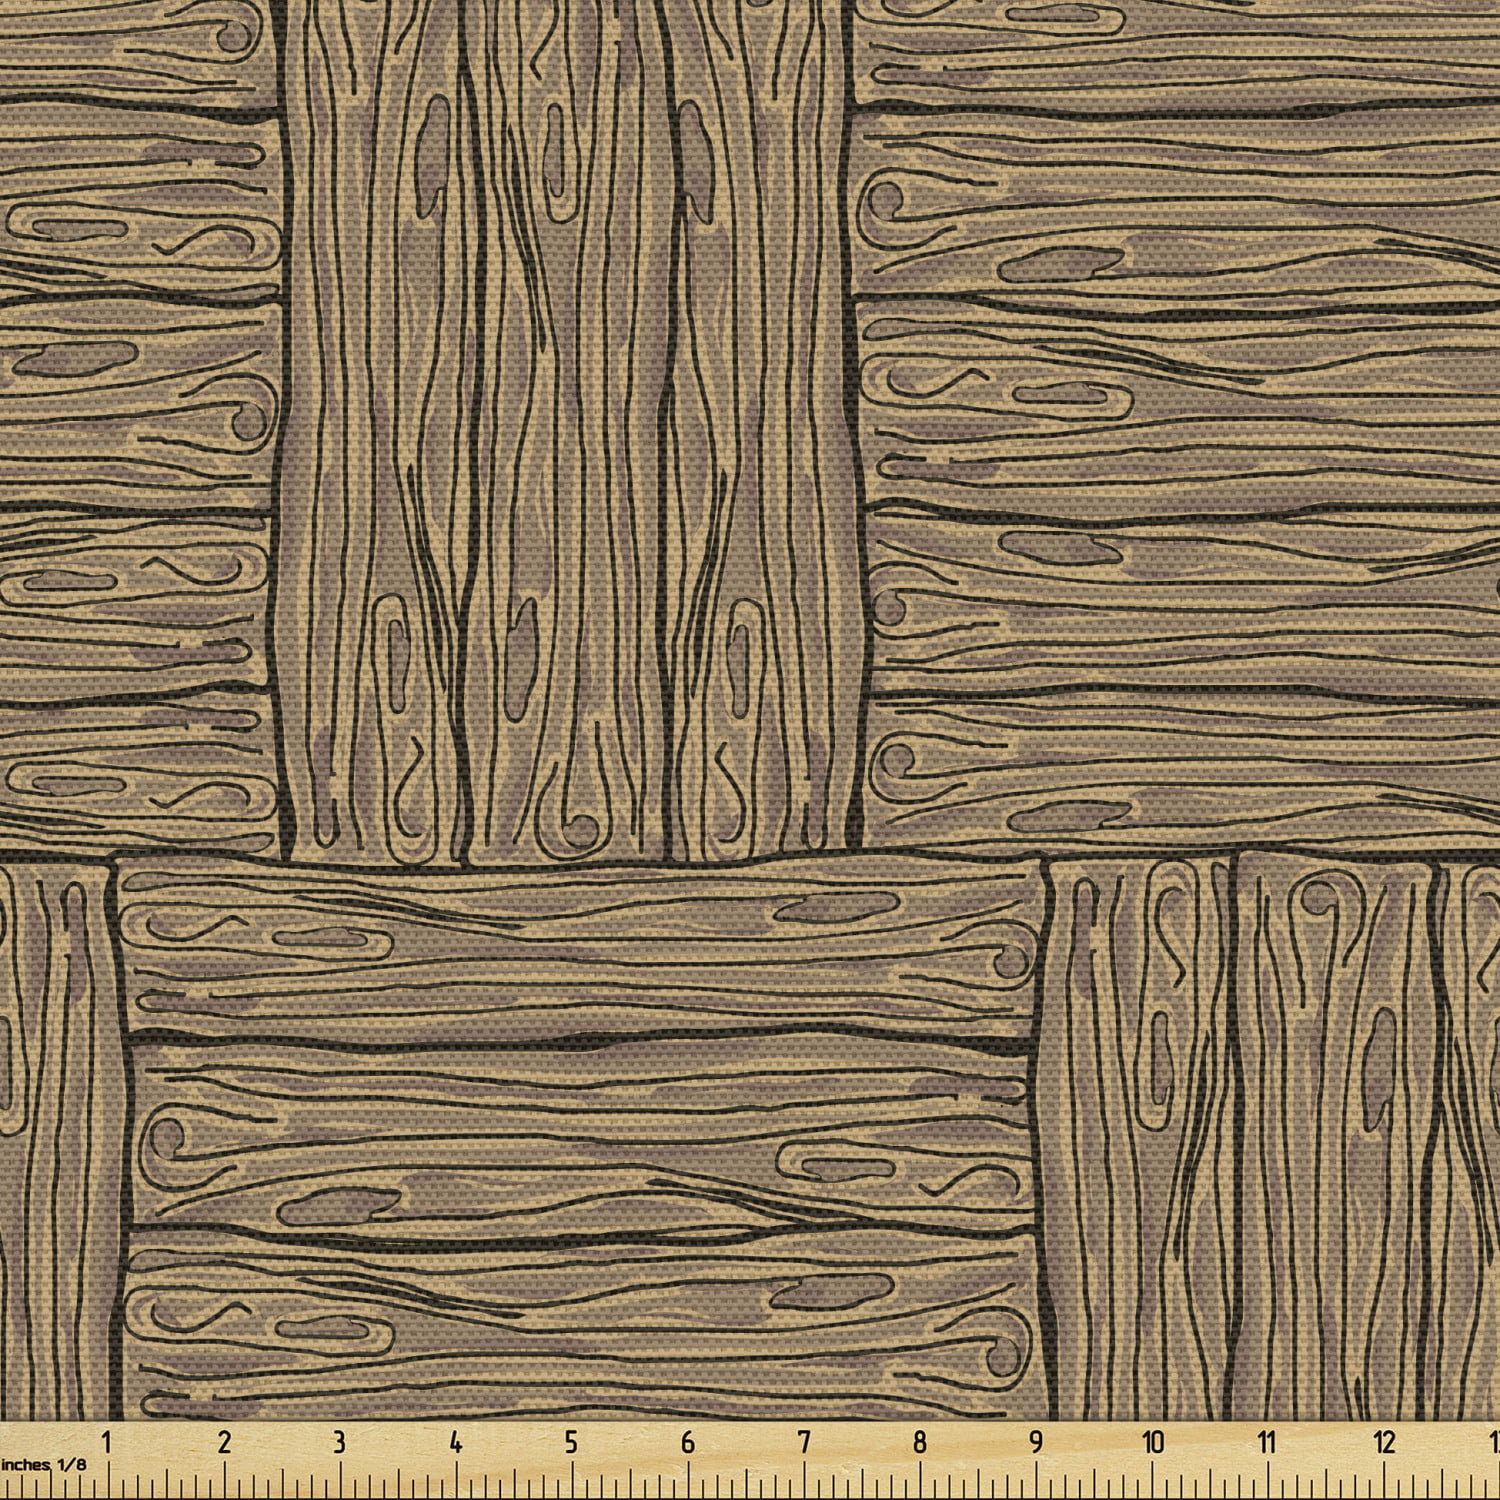 Rustic Fabric by the Yard, Wooden Texture Pattern in Cartoon Drawing Style  Abstract Parquet Floor Design, Decorative Upholstery Fabric for Sofas Home  Accents, 5 Yards, Pale Brown Black by Ambesonne 